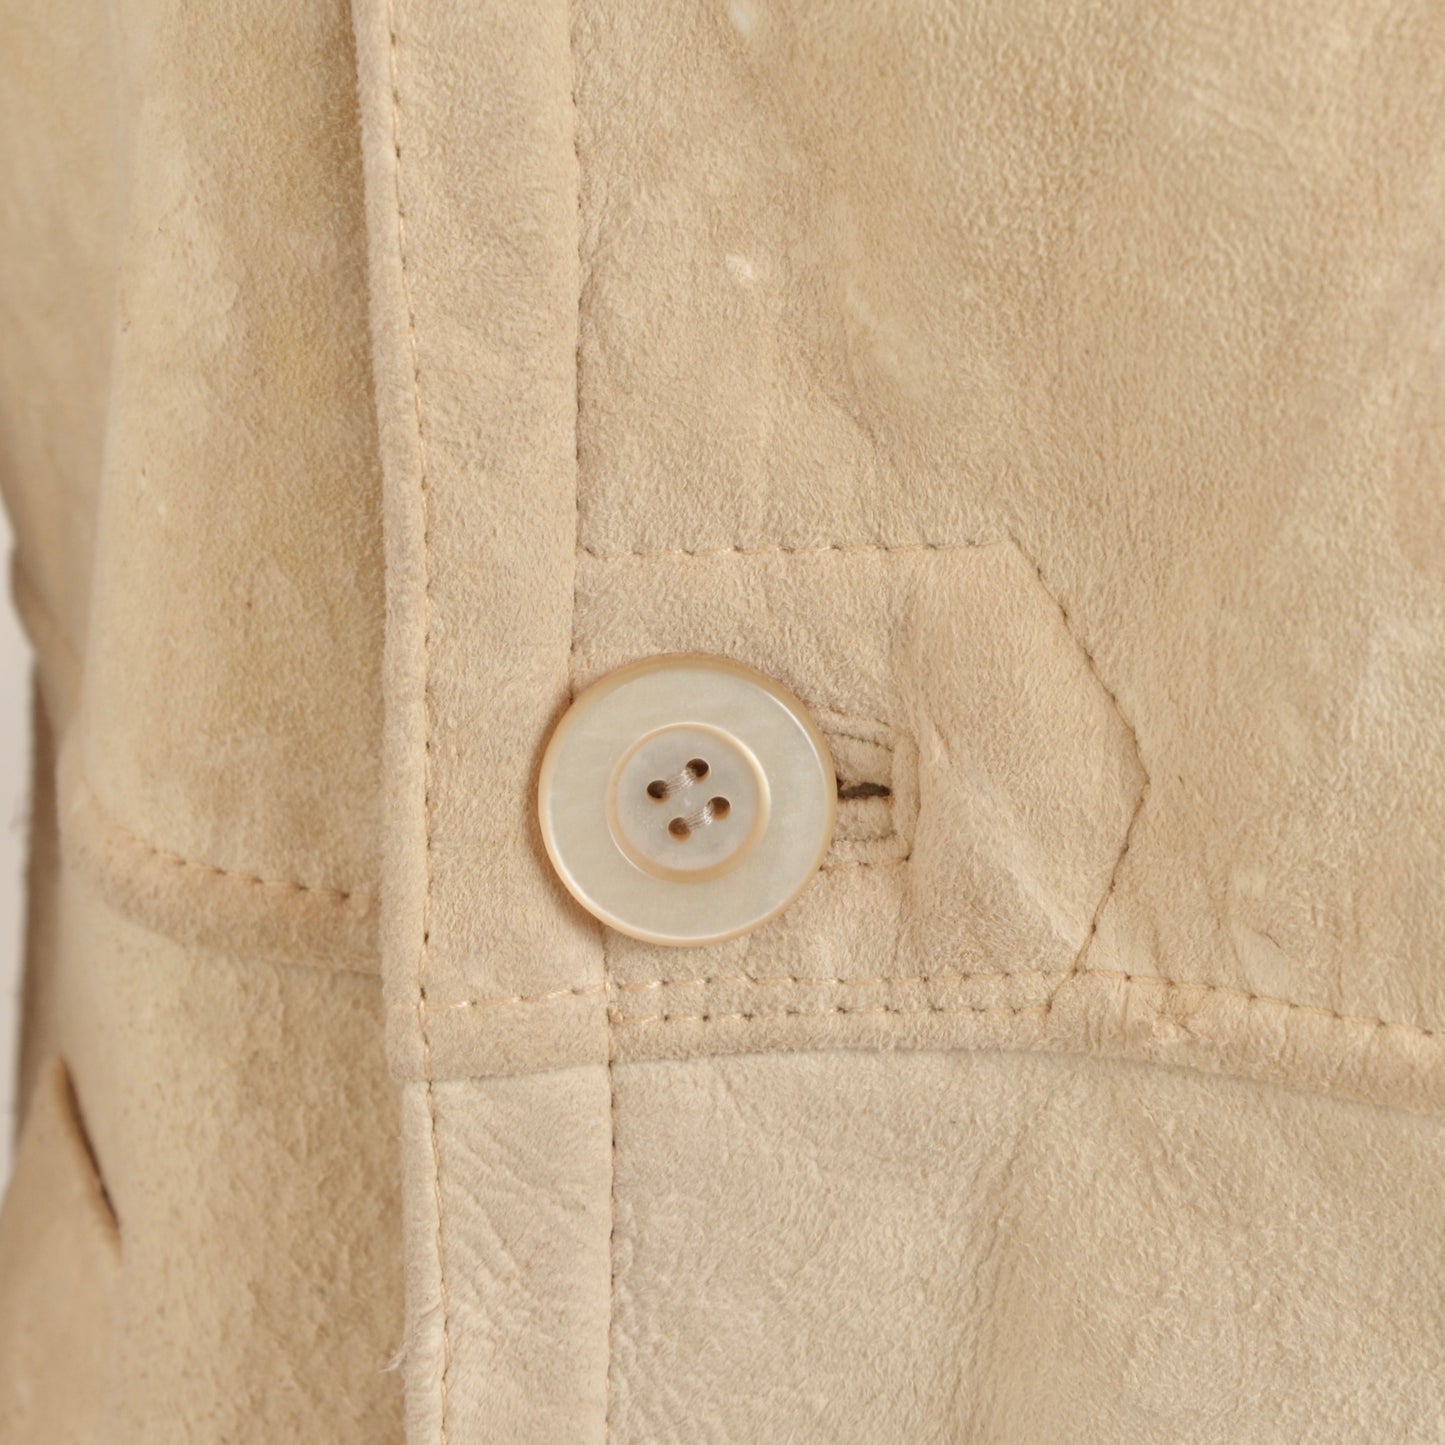 Full Length Double-Breasted Shearling Coat Size - Cream